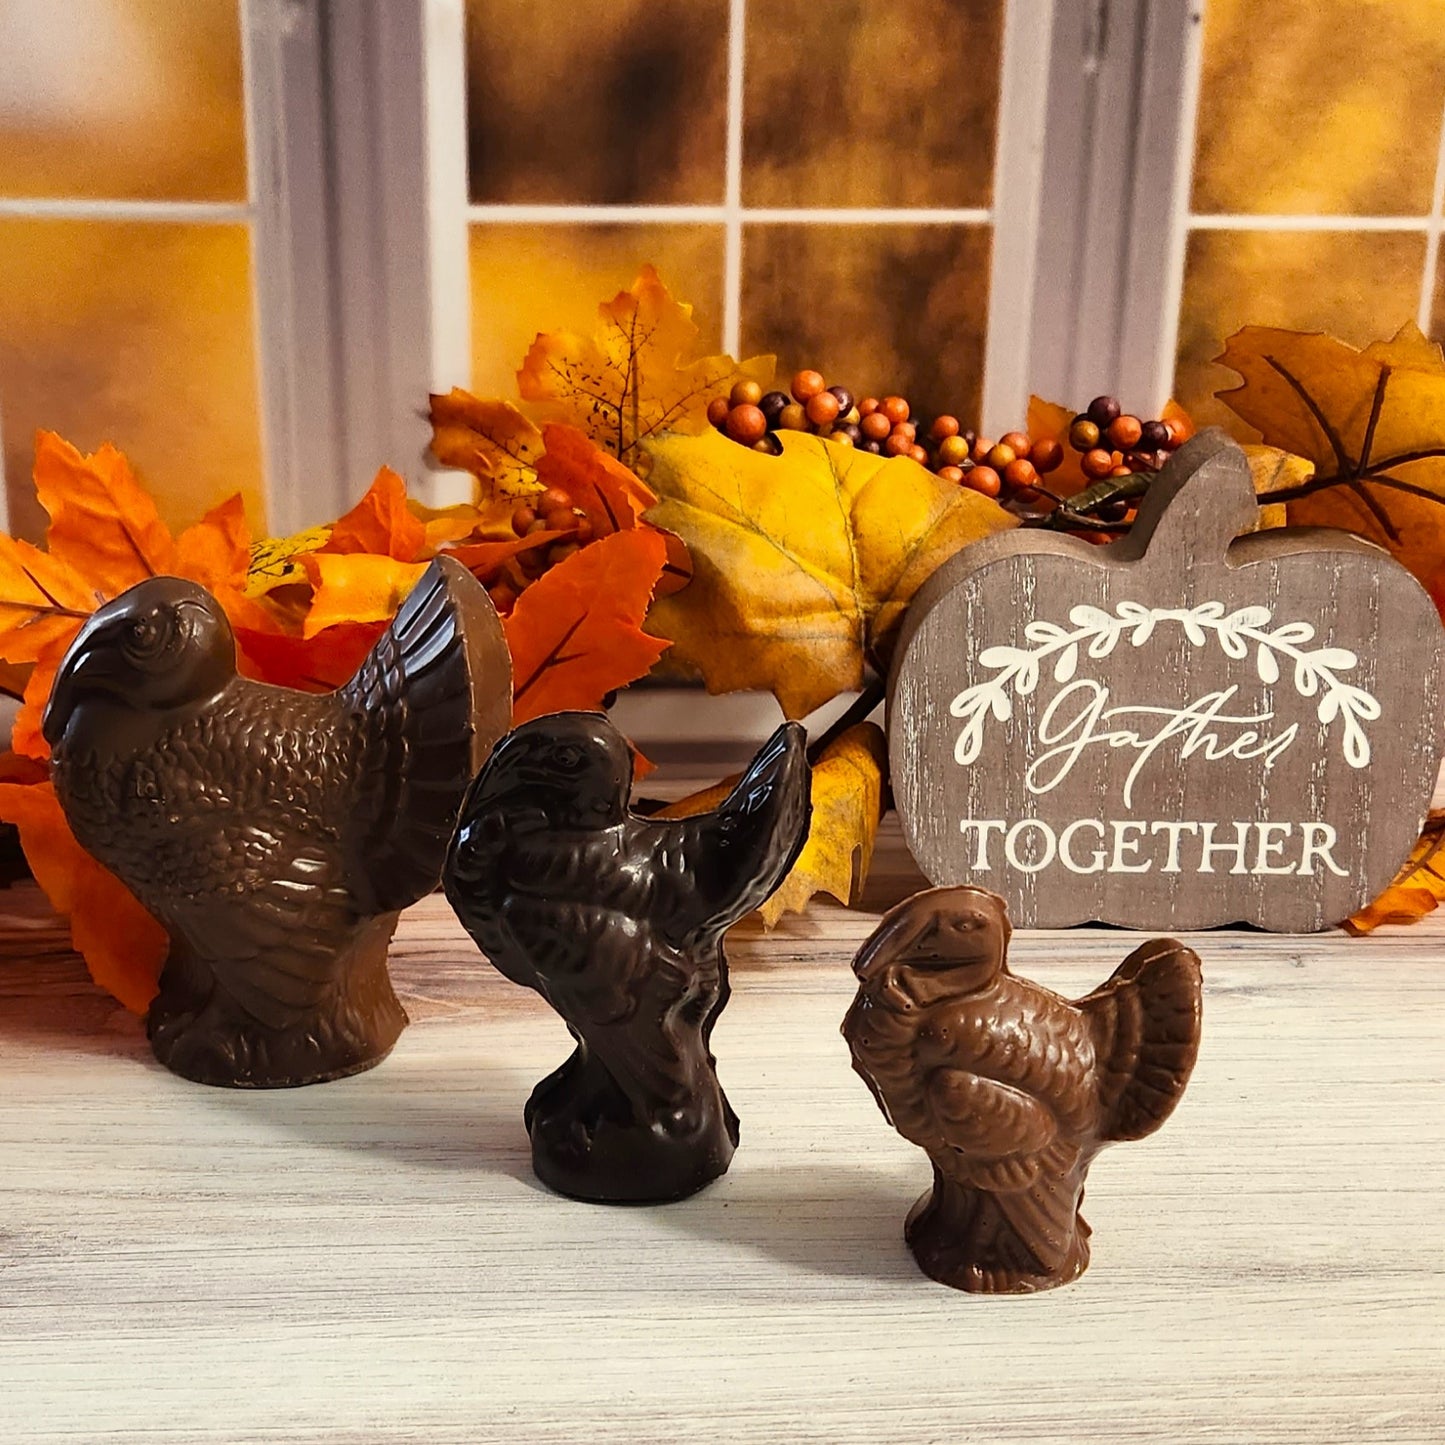 Our 3D Chocolate Turkeys are an Irresistible Delicious Fall Treat for your thanksgiving celebration!